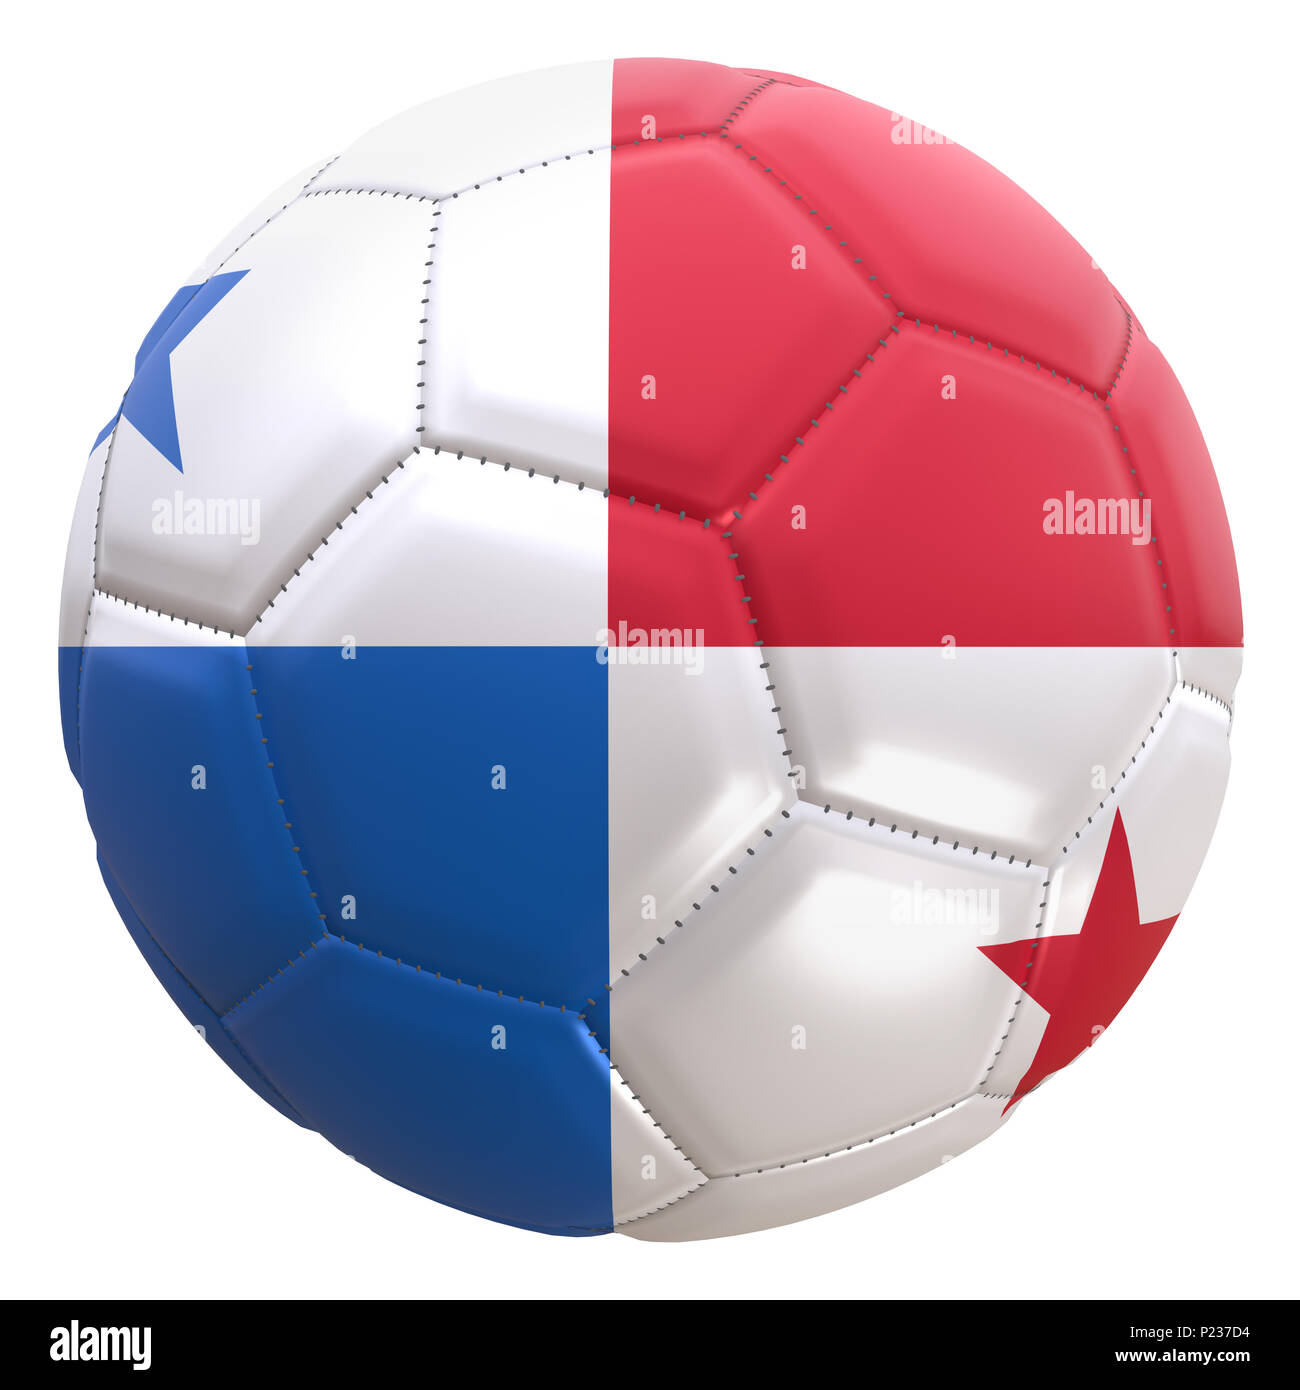 3d rendering of a Panama flag on a soccer ball. Panama is one of the team of world cup championship in Russia 2018. Stock Photo